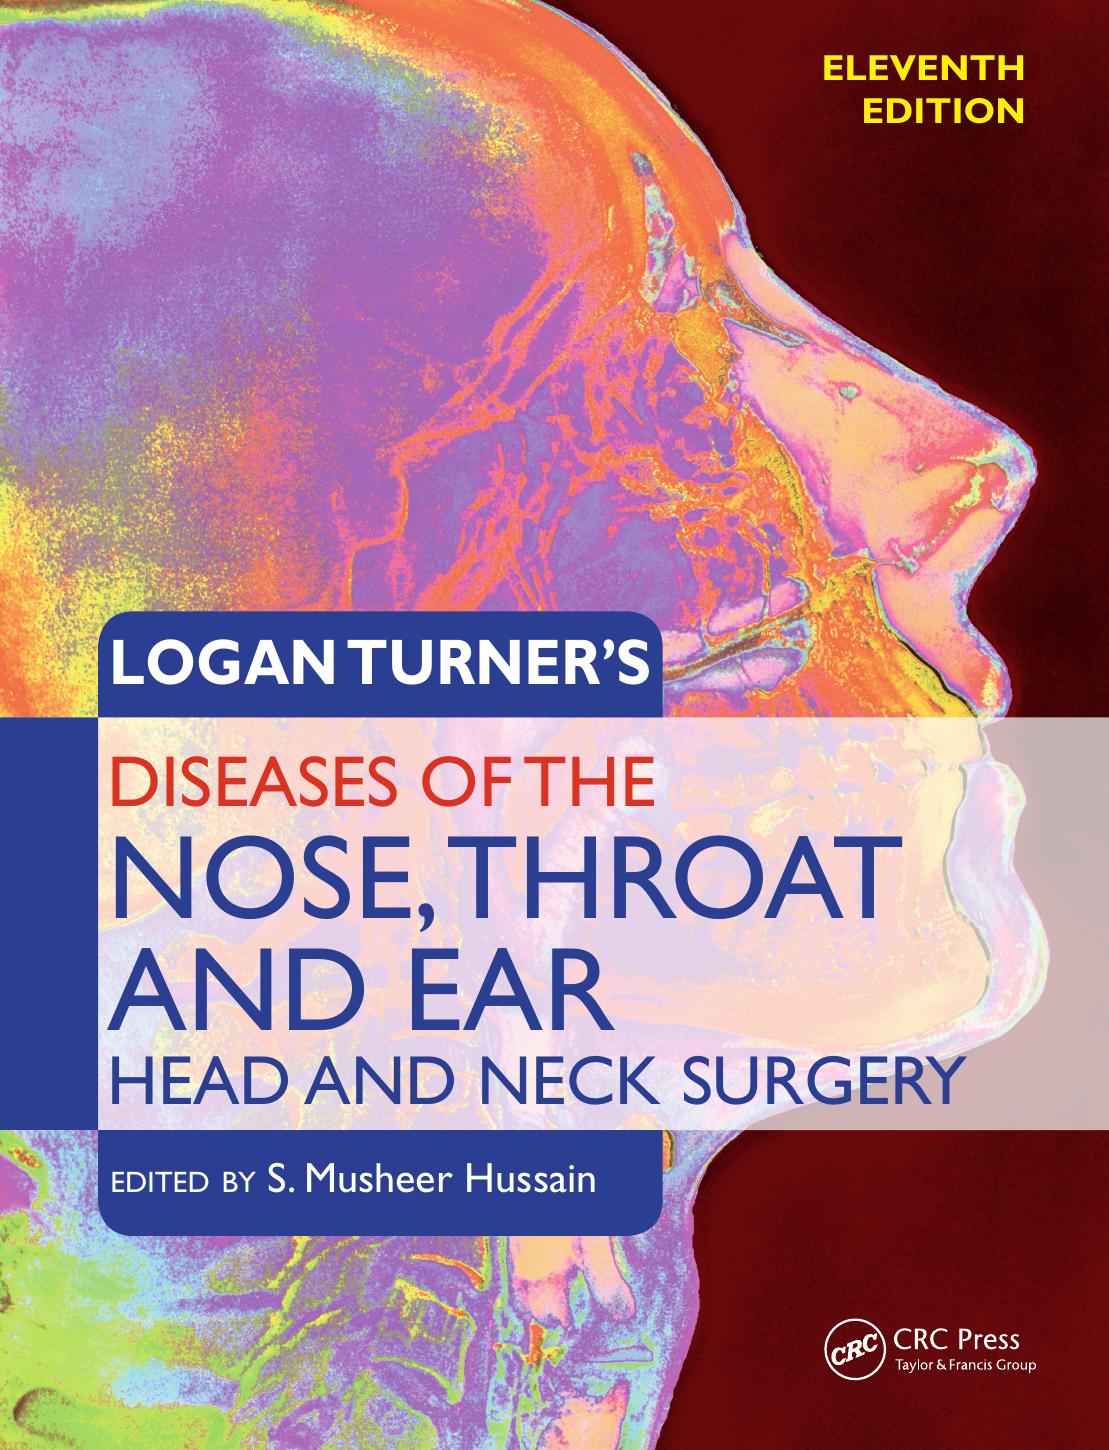 Logan Turner Disease of the Nose,Throat and Ear Head and Neck Surgery 11th Edition.jpg